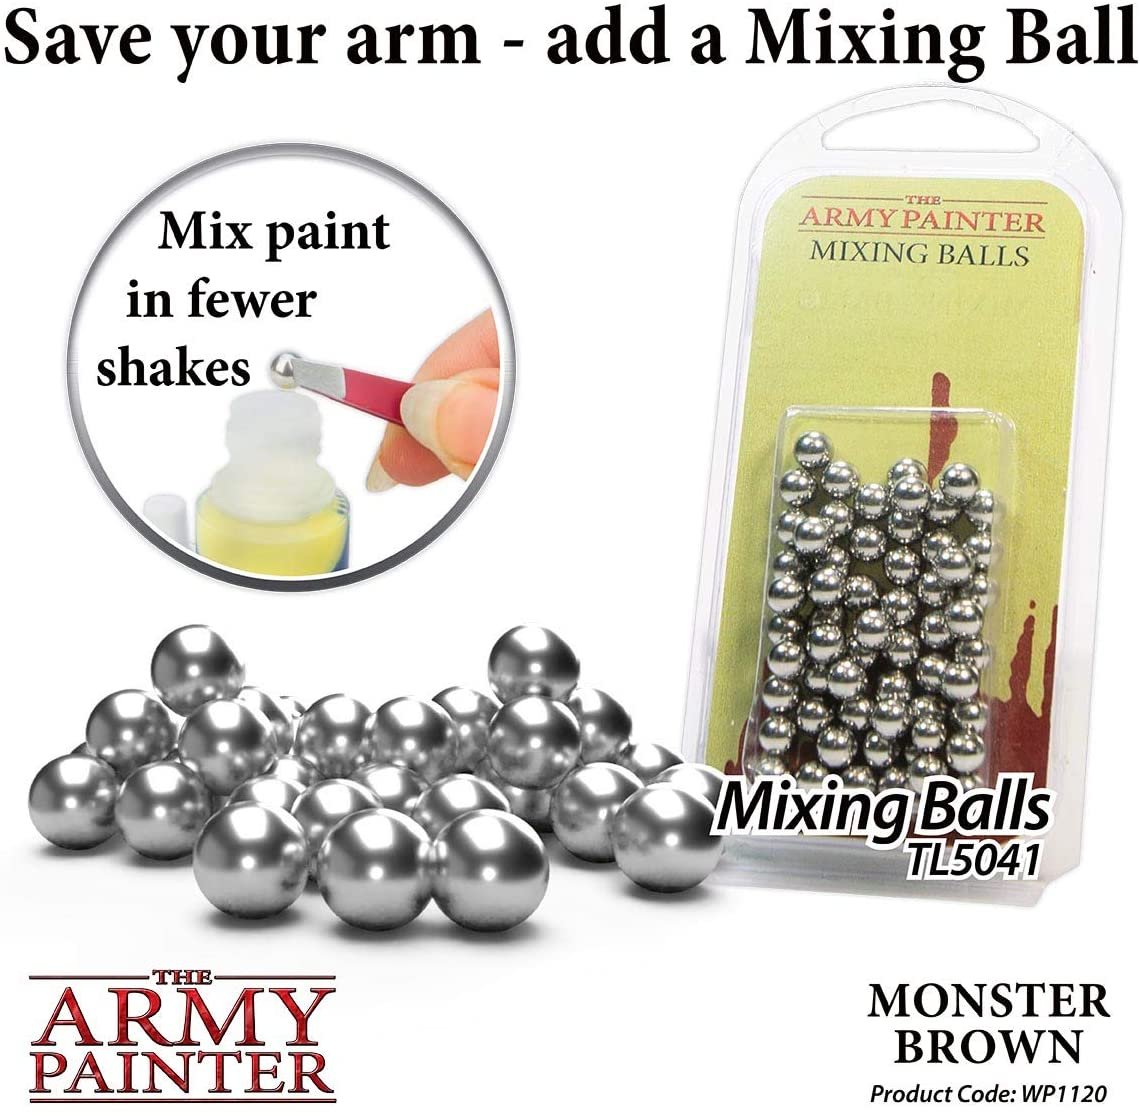 The Army Painter - Warpaints: Monster Brown (18ml/0.6oz)